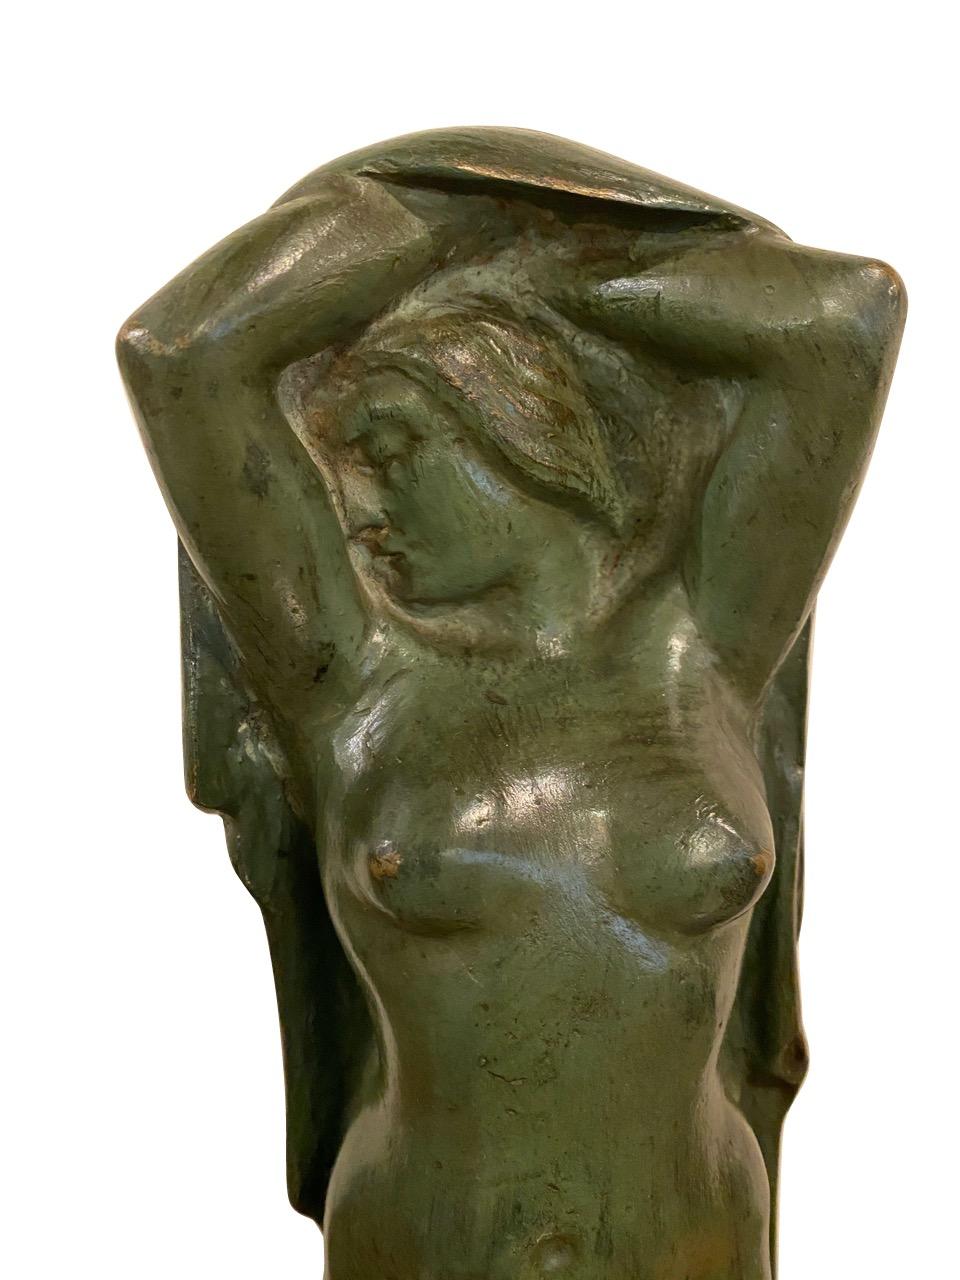 Figurative Art Deco sculpture of standing woman in bronze on marble. Important Belgian sculpture with great history and background. Unique piece in verdigris on bronze stylized Art Deco era circa 1930s. The woman is draped in a cape or shawl in a